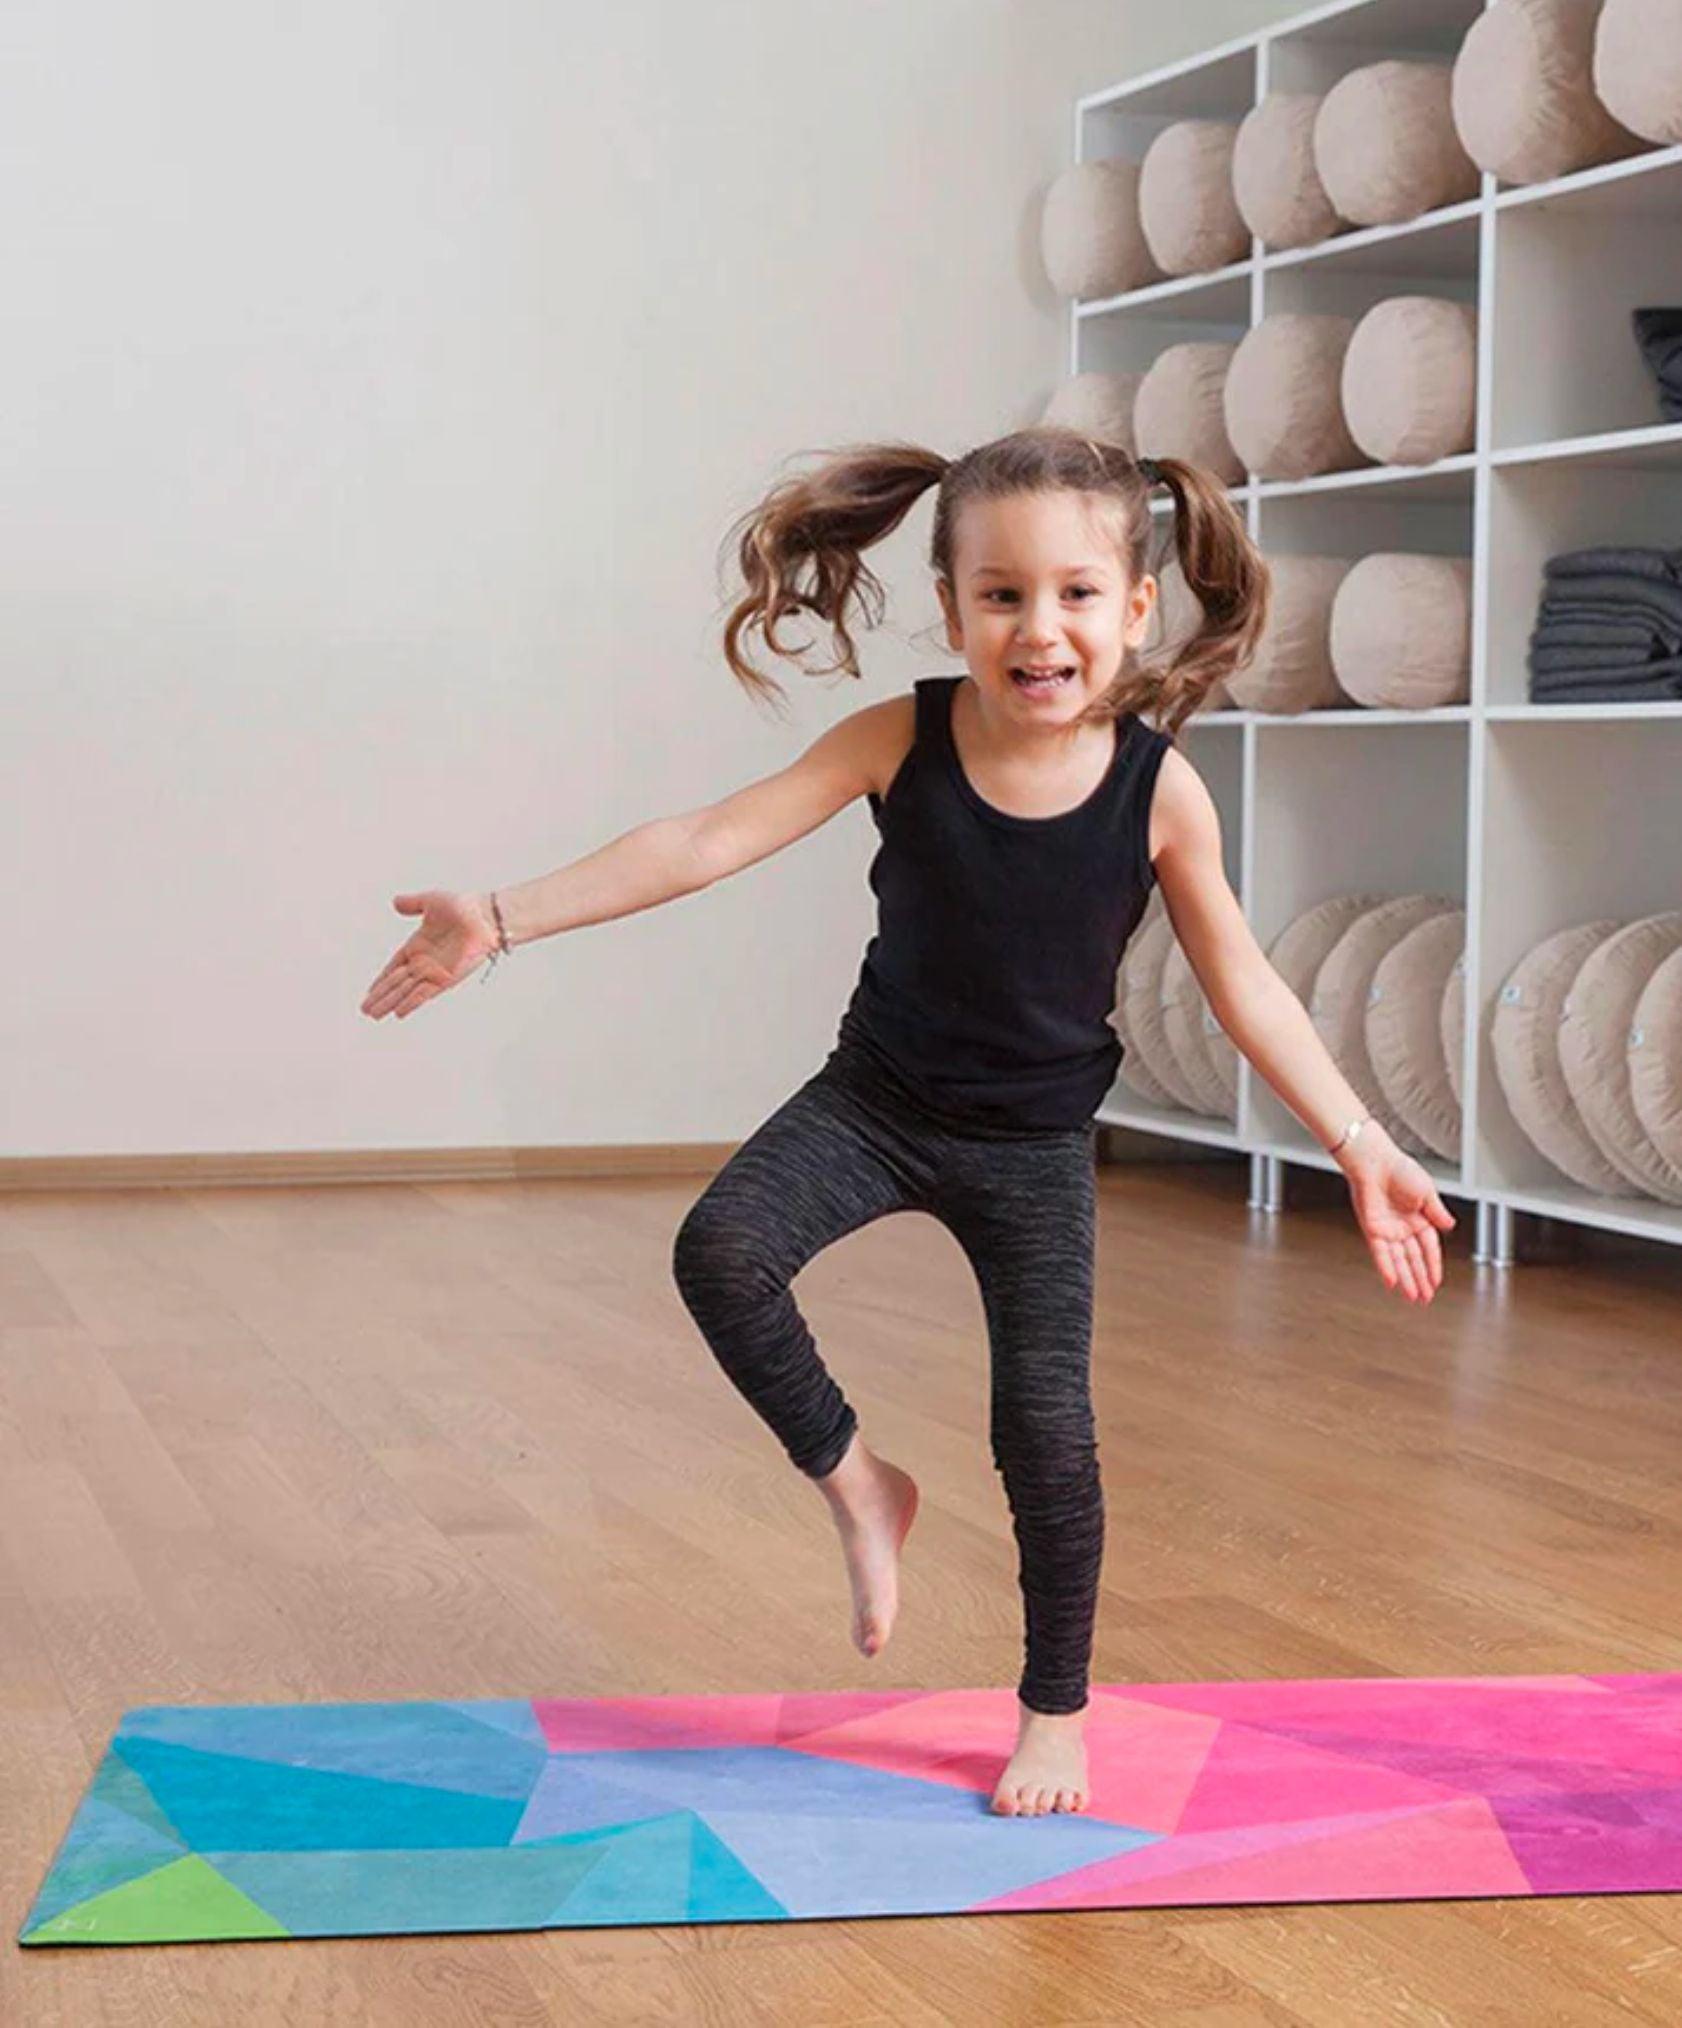 YDL Combo Kid’s Yoga Mat - 2-in-1 (Mat + Towel) For Kids Yoga Practices - Yoga Design Lab 